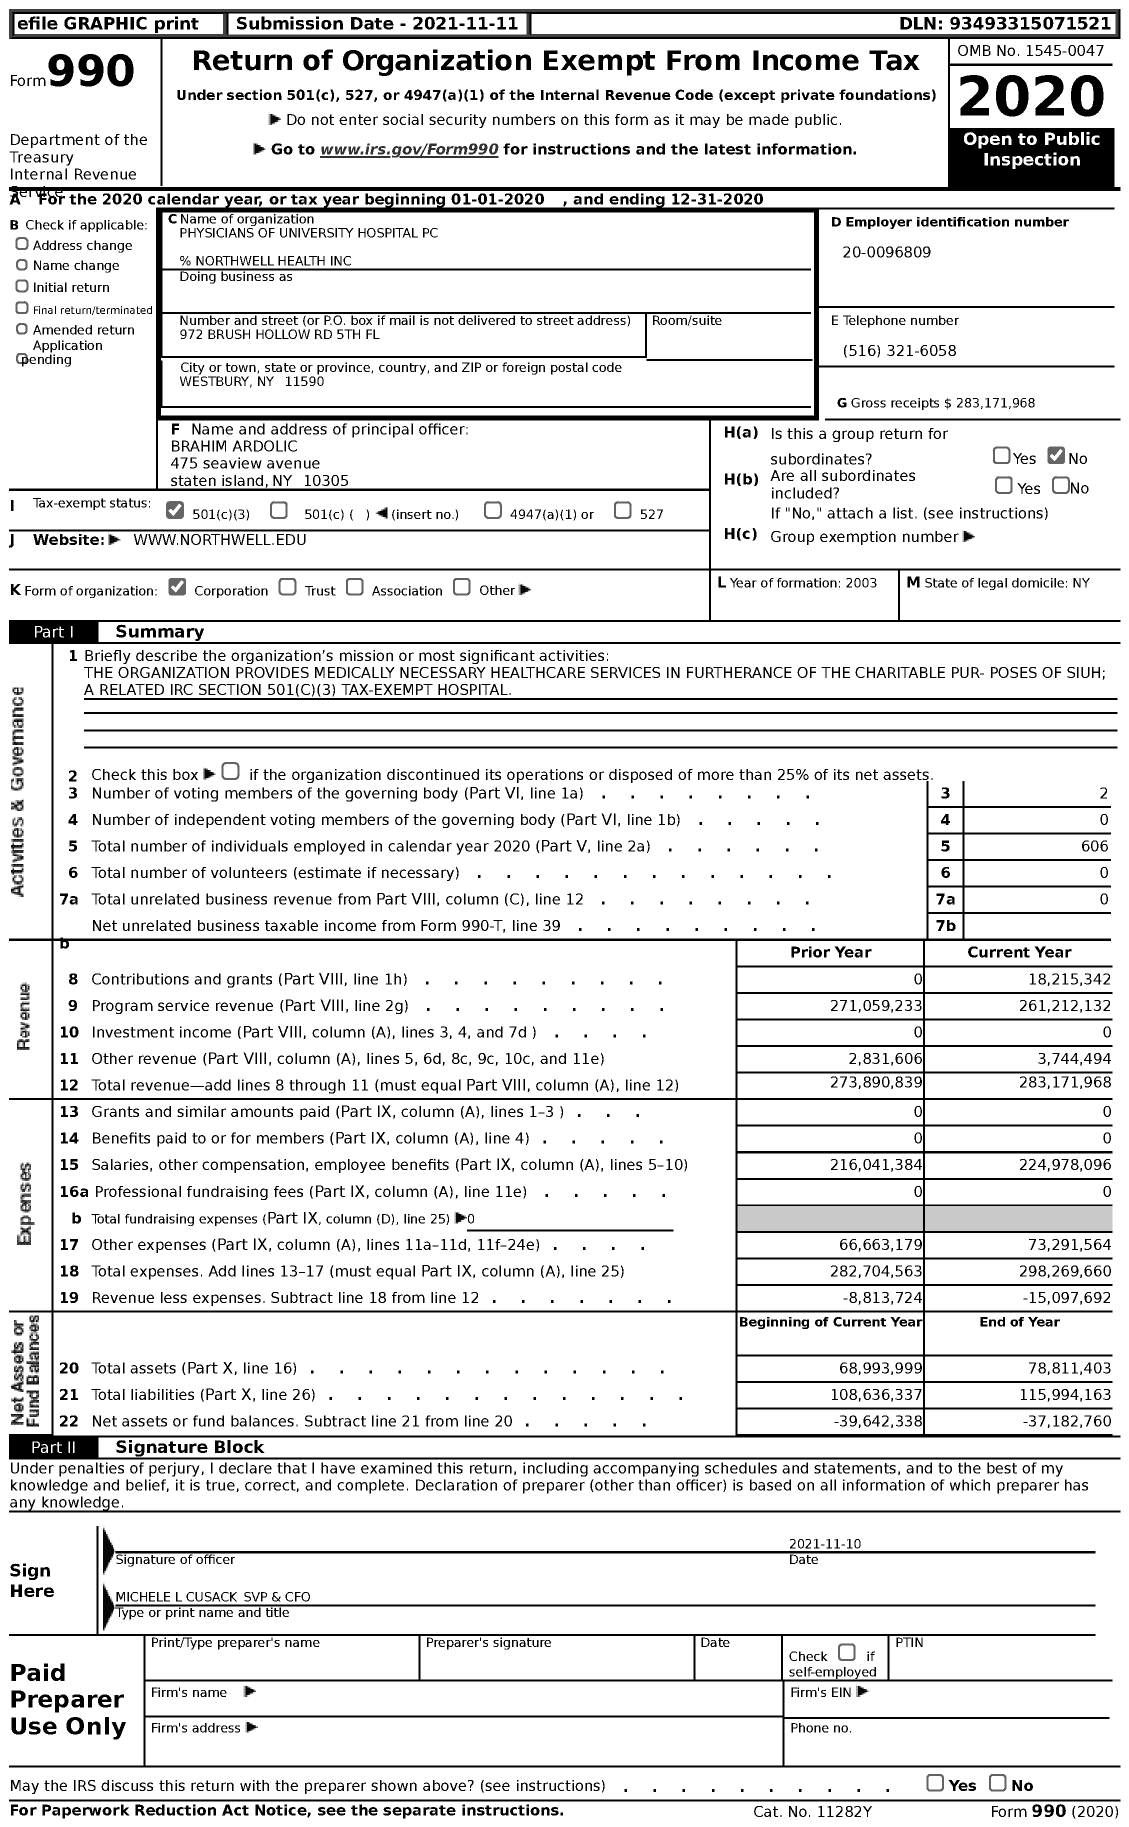 Image of first page of 2020 Form 990 for Physicians of University Hospital PC